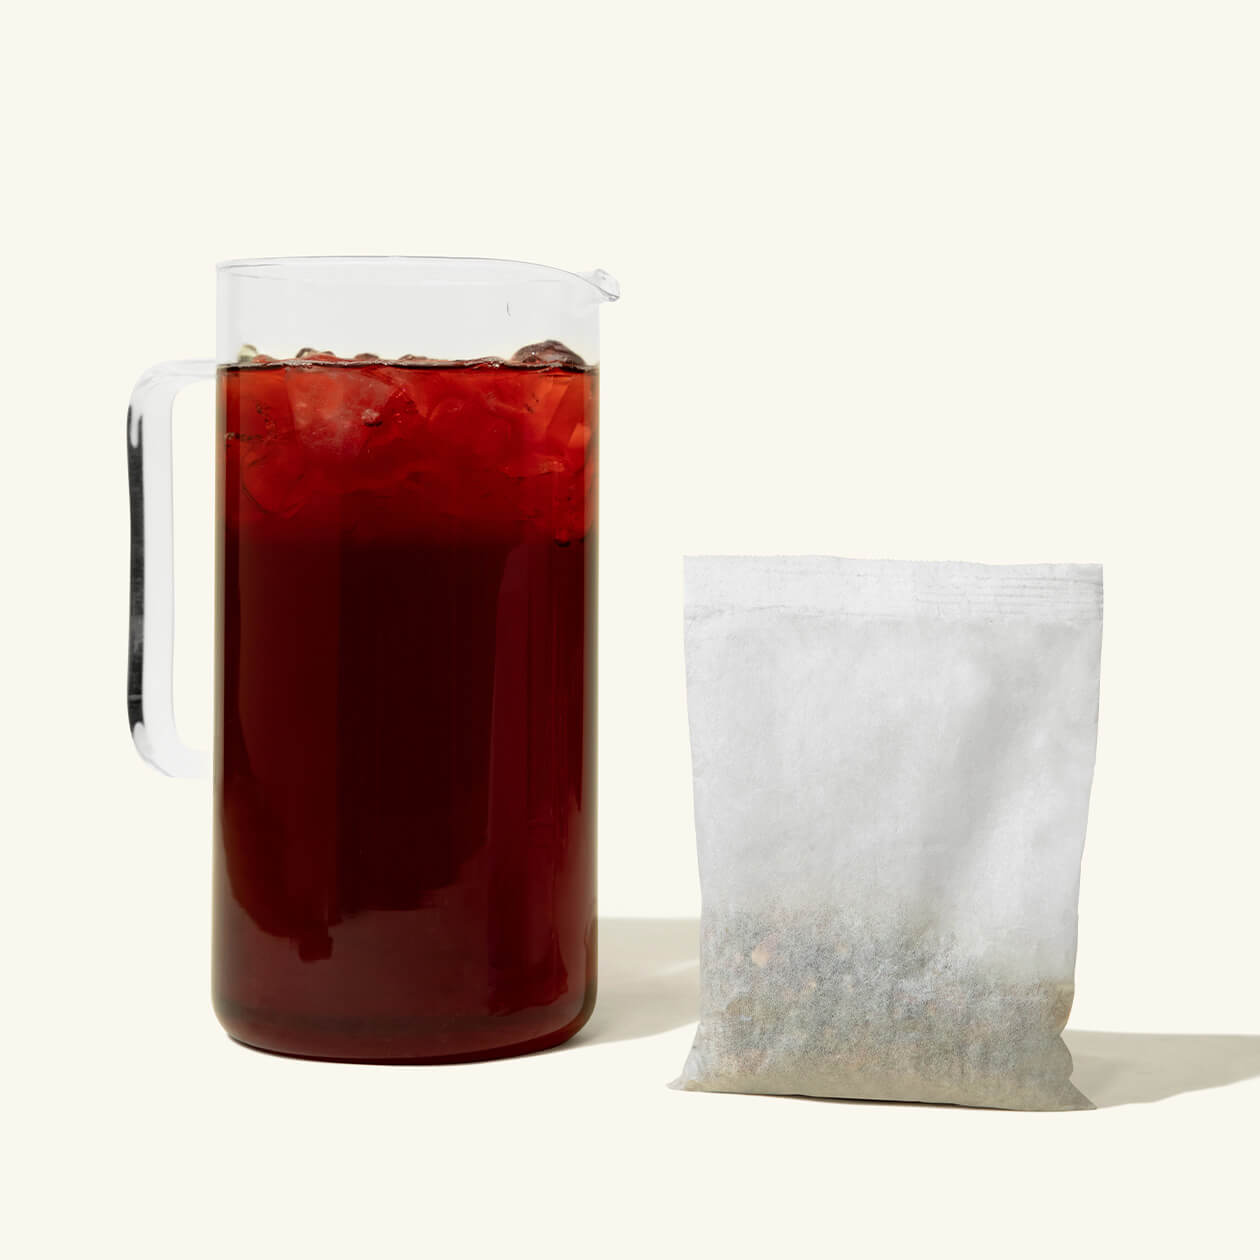 A pitcher of Numi Berried Treasures Iced Tea with a gallon iced tea pouch